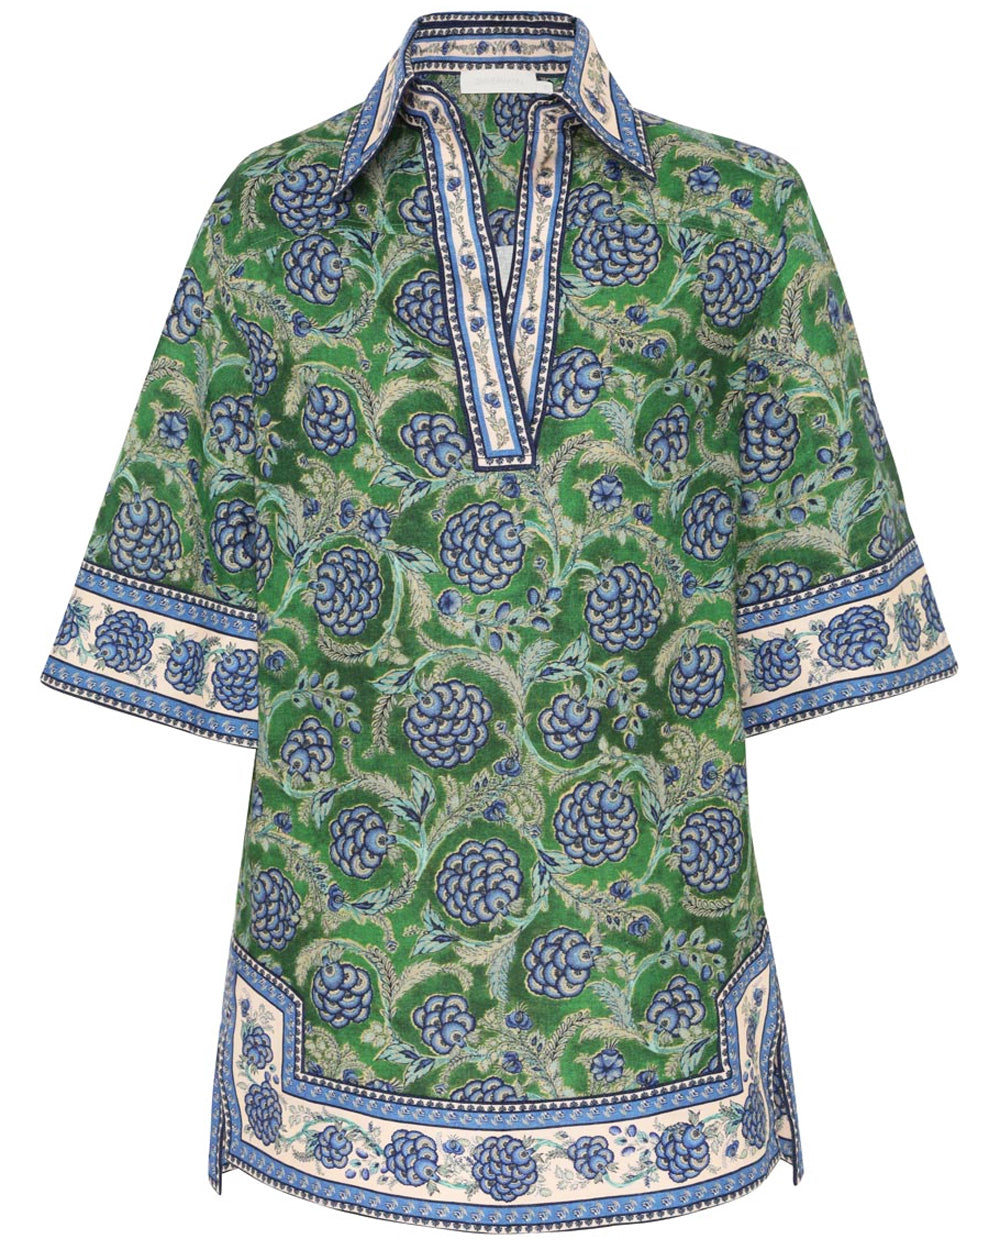 Green and Blue Junie Tunic Dress